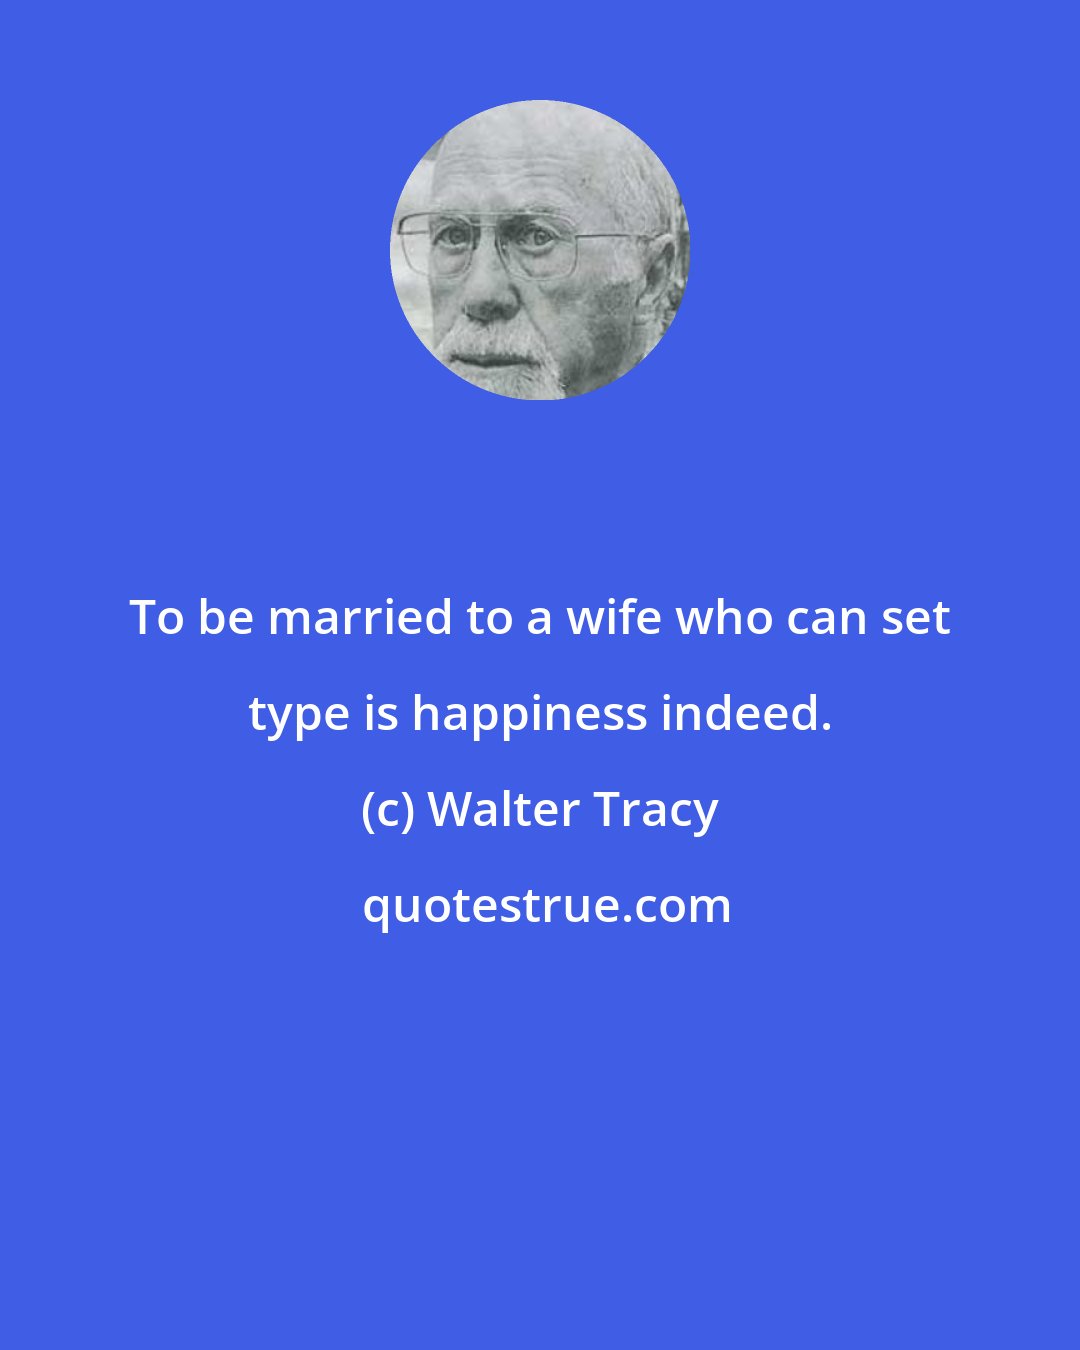 Walter Tracy: To be married to a wife who can set type is happiness indeed.